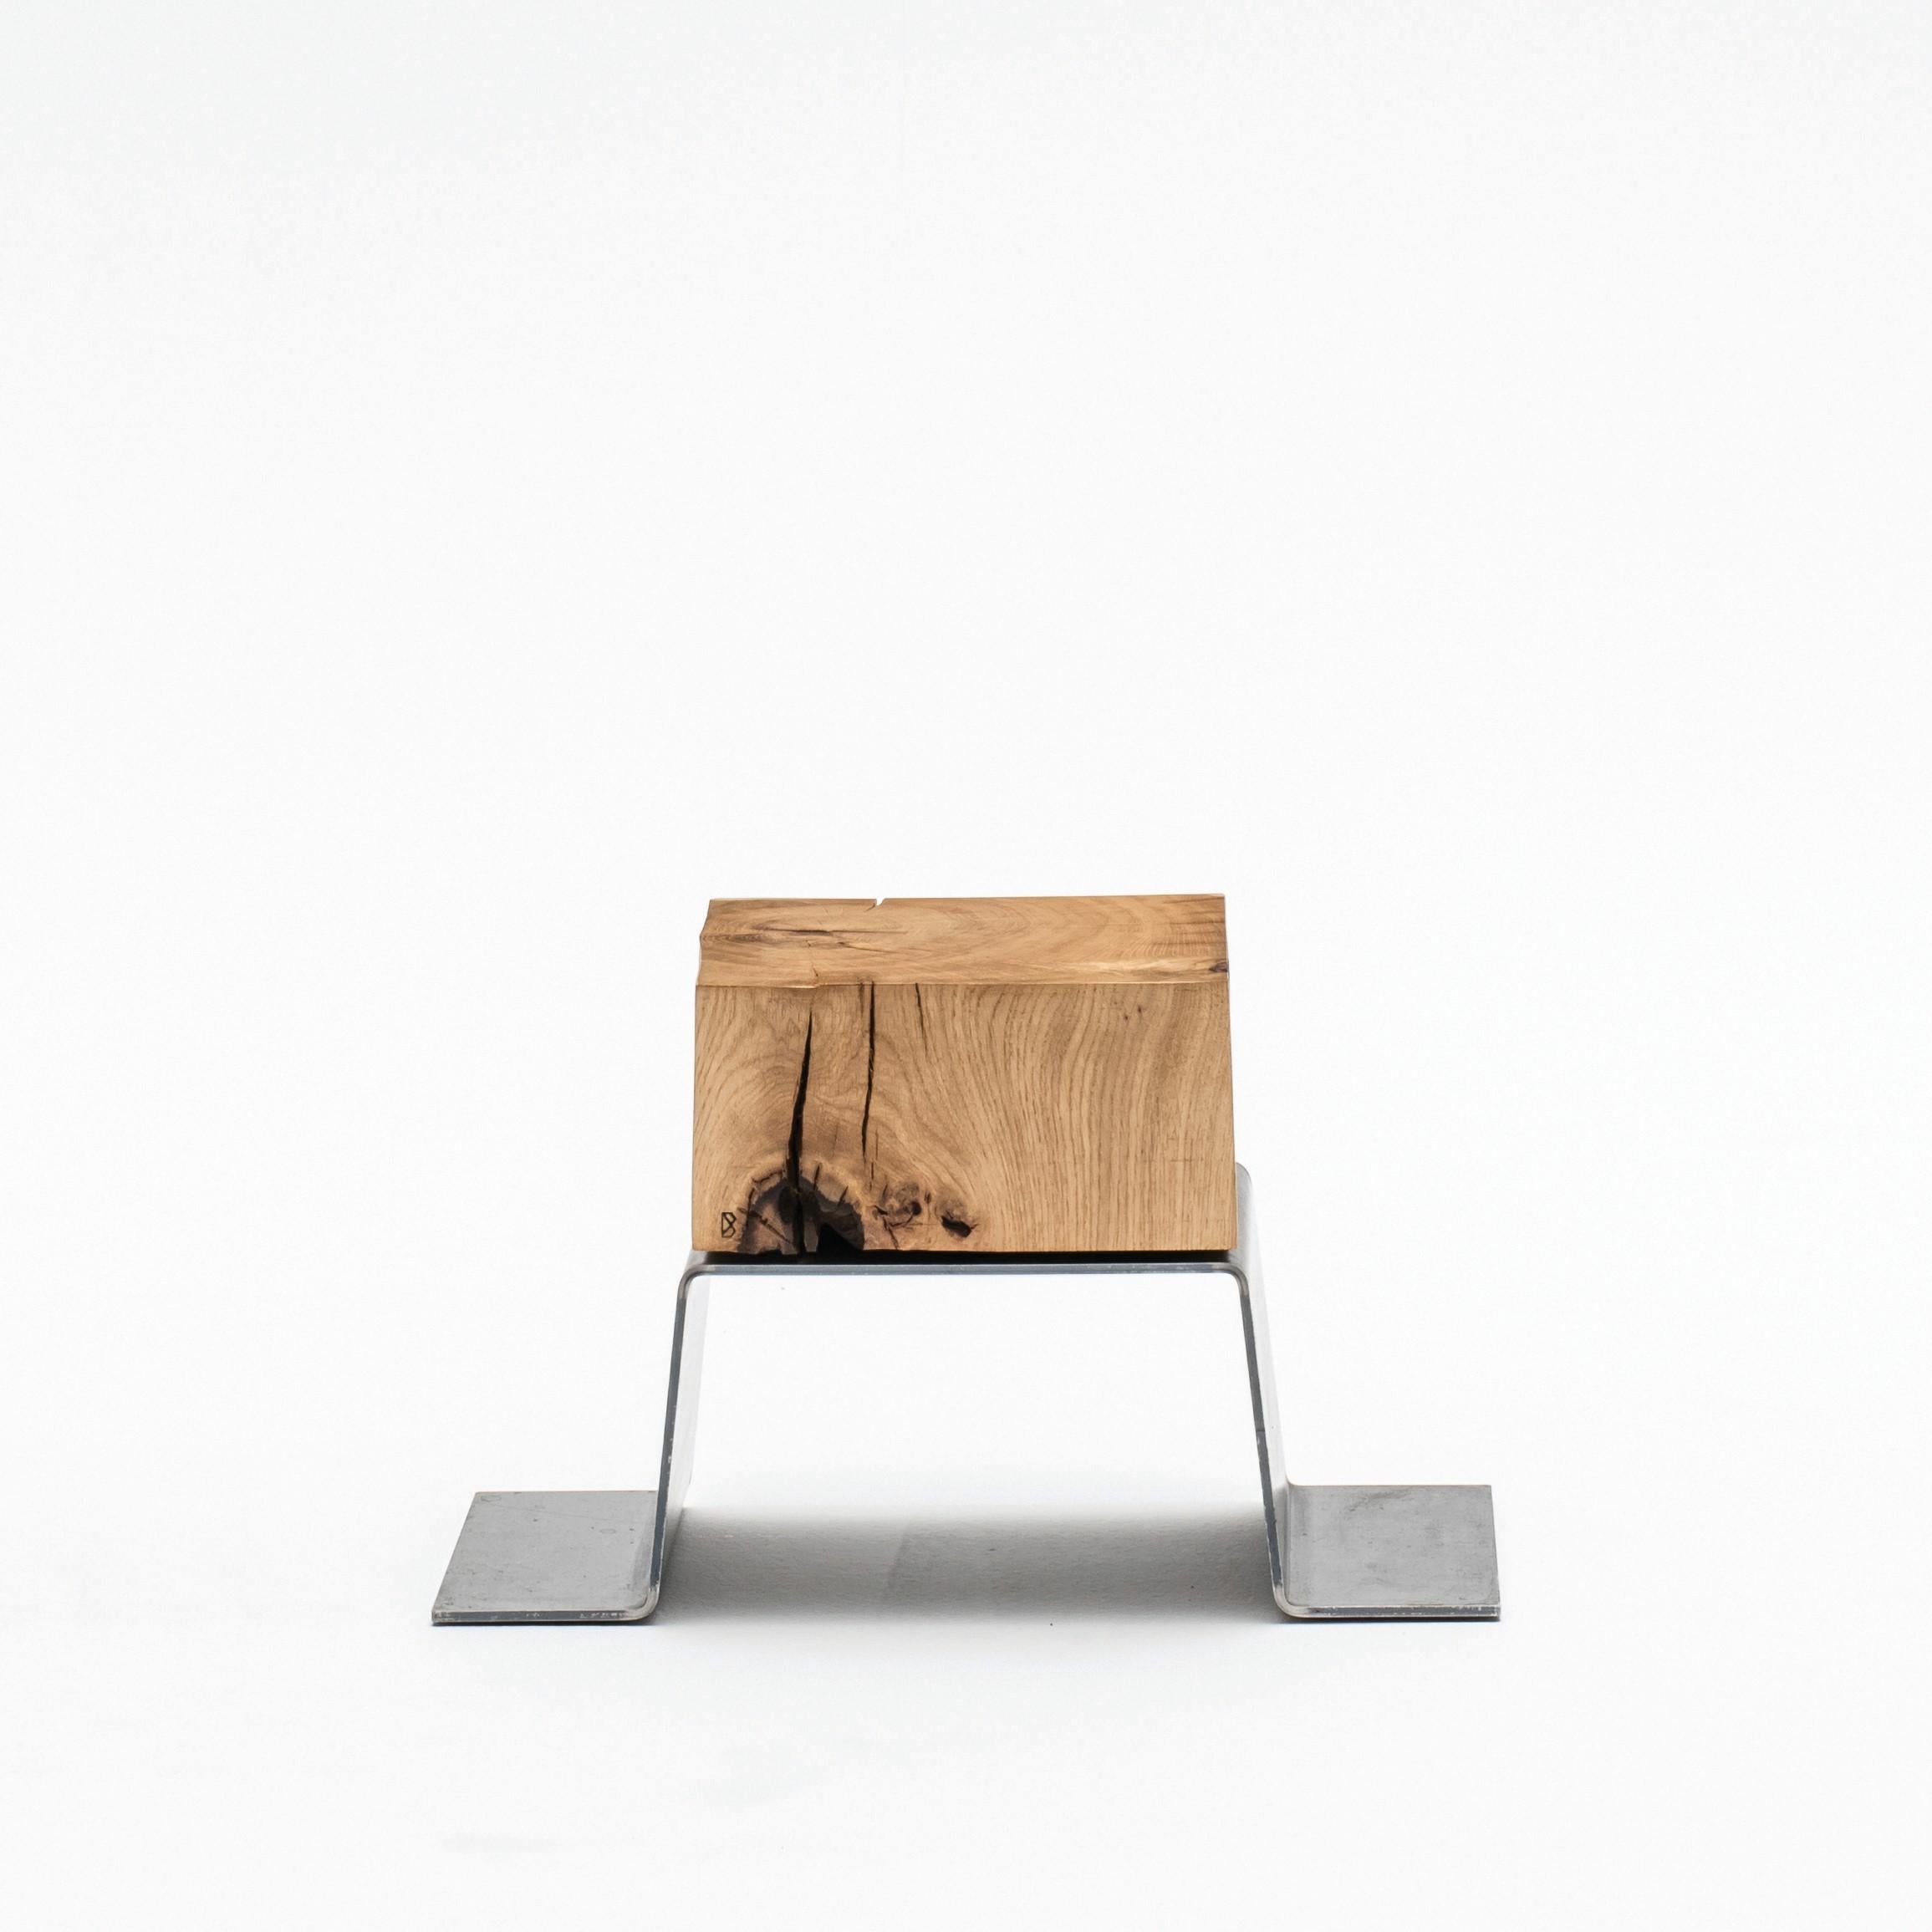 THE LINE Foot Stool is beautifuly simple but perfectly designed for stretching your legs out and putting your feet up.

It is the reversed V-shaped stool made of the combination of the 200/300-year-old oak and the raw steel. The oak is drummed up